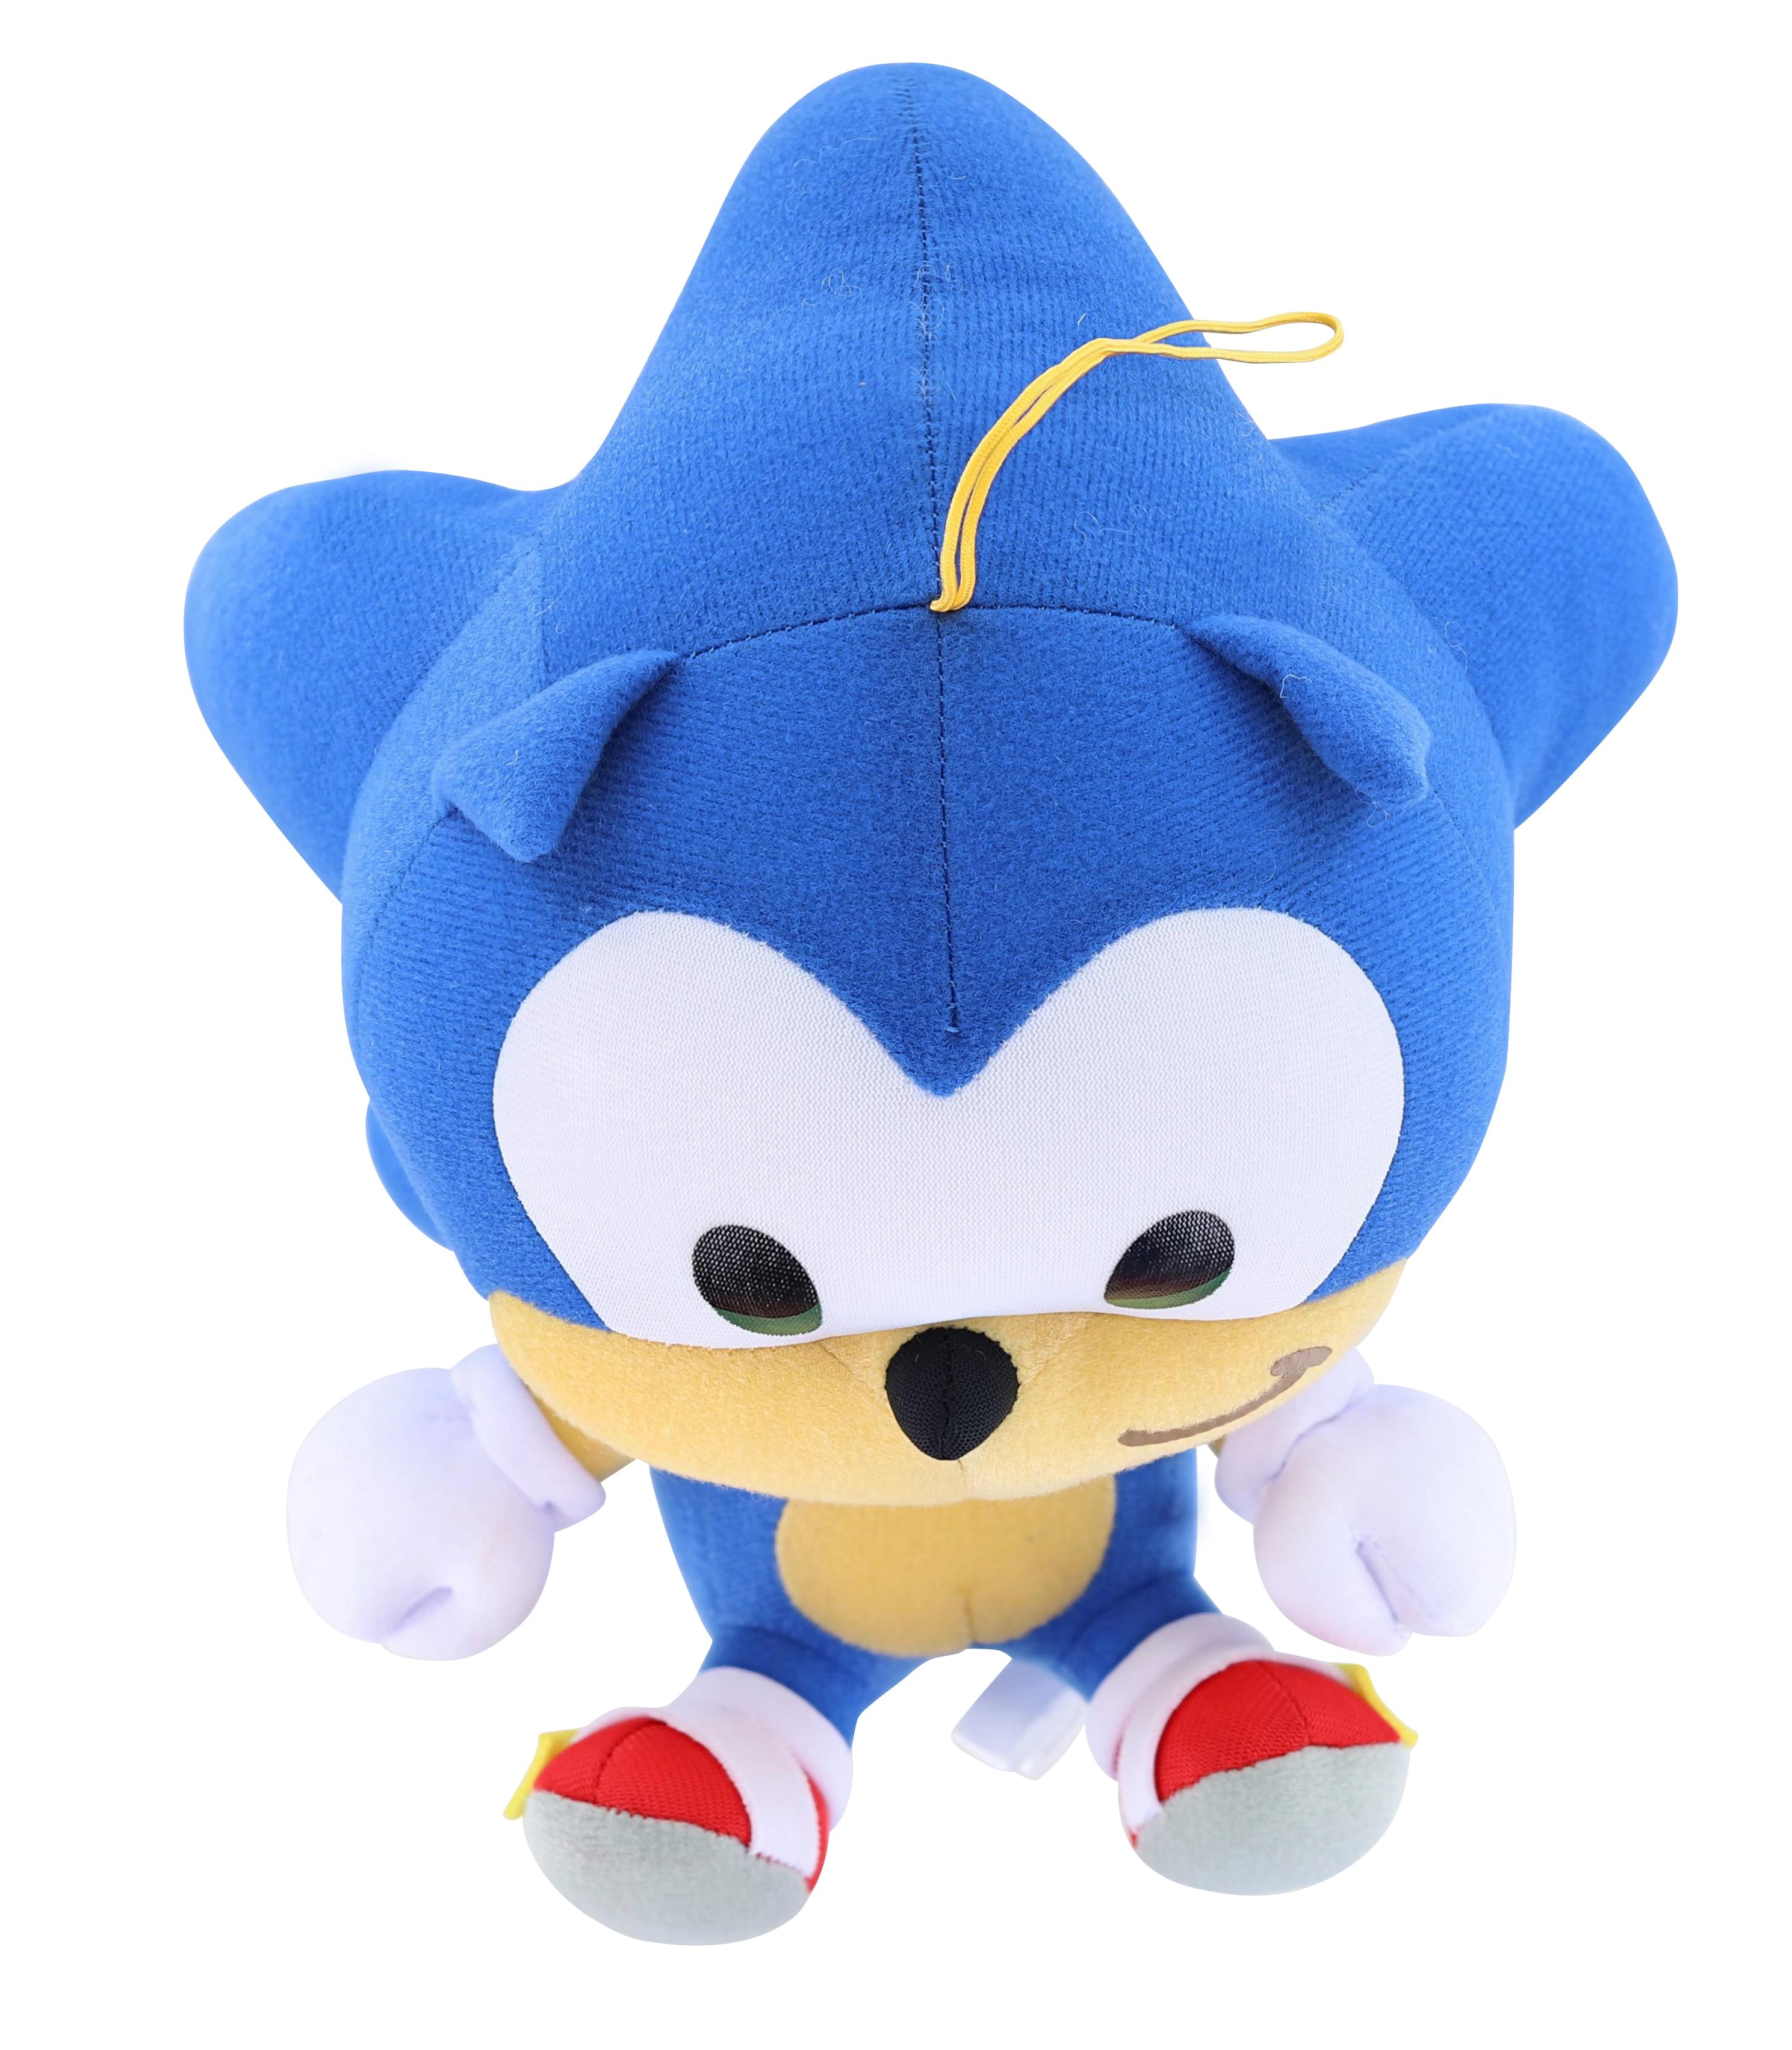 Photos - Soft Toy SONIC THE HEDGEHOG - SD SONIC SITTING PLUSH 7" GEE-56578-C